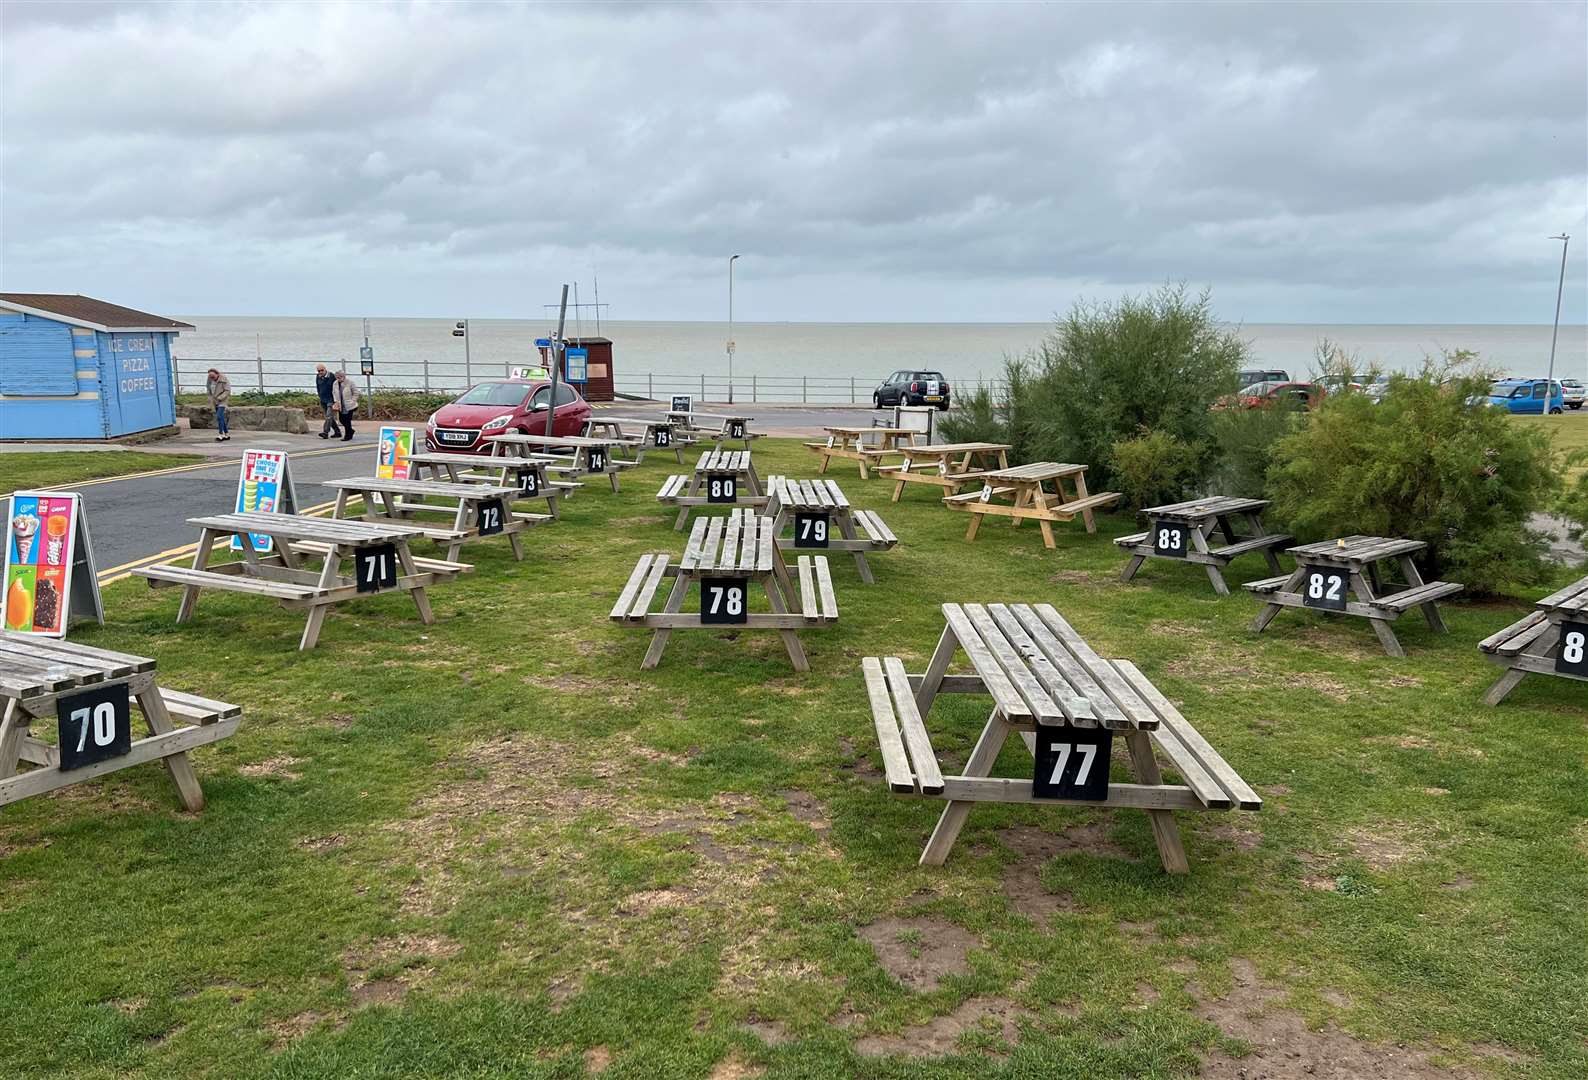 The sea is a mere matter of metres away - with a lovely outdoor spot for dining and drinks